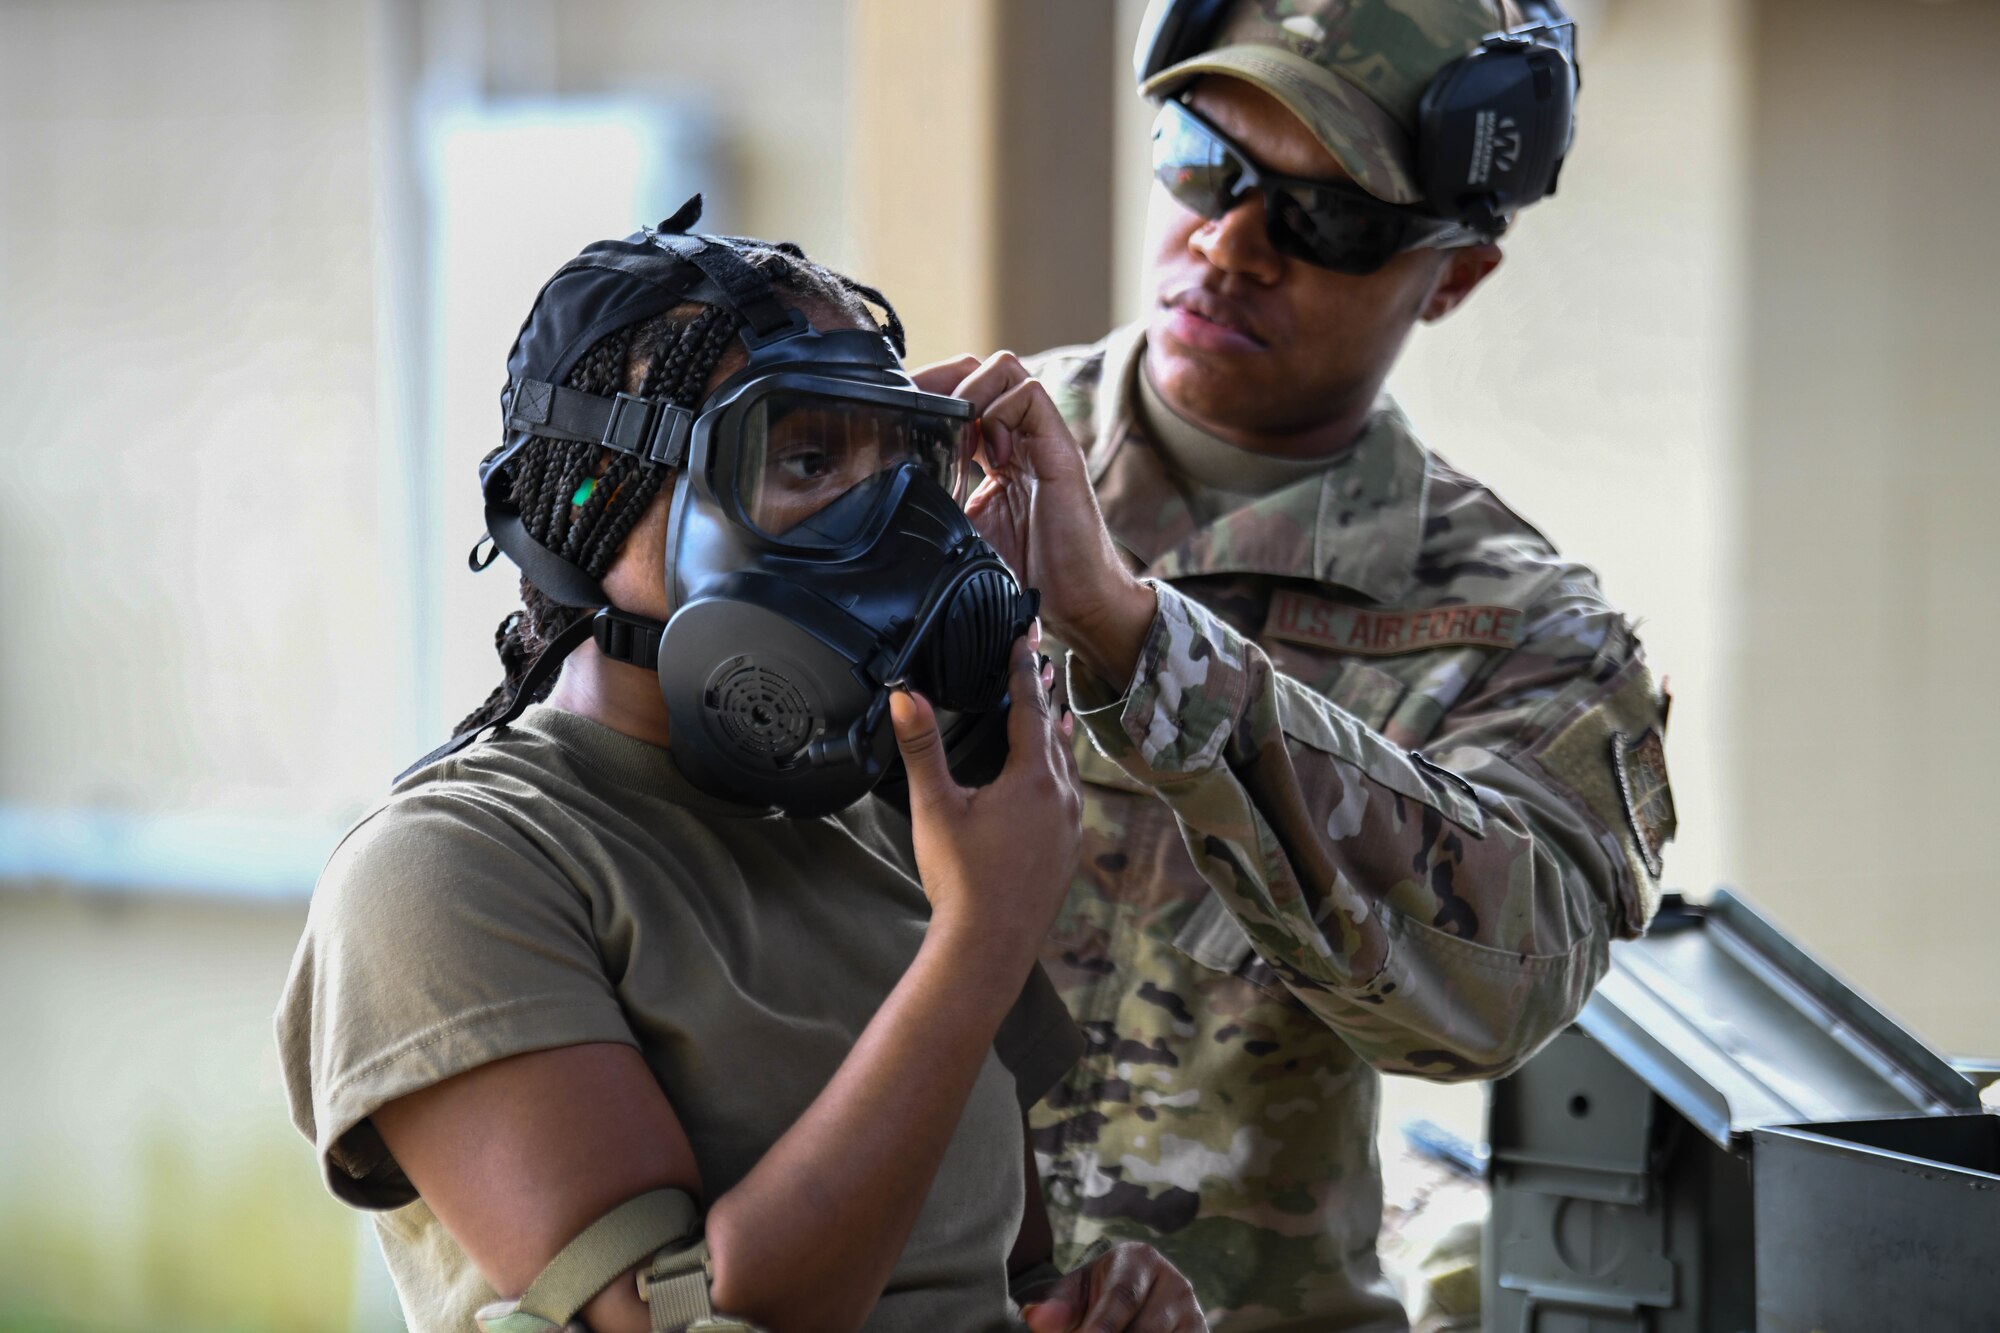 Members of the 172nd Airlift Wing, Jackson, Mississippi, Resource Protection Team qualified on the M18 pistol and M4 rifle at the Combat Readiness Training Center, Gulfport, Mississippi, December 6, 2022. The 172 RPT is a volunteer force, drawn from shops across the base, comprised of trained multi-capable augmentees to the 172nd Security Forces Squadron. U.S. Air National Guard photo by Airman 1st Class Shardae McAfee.